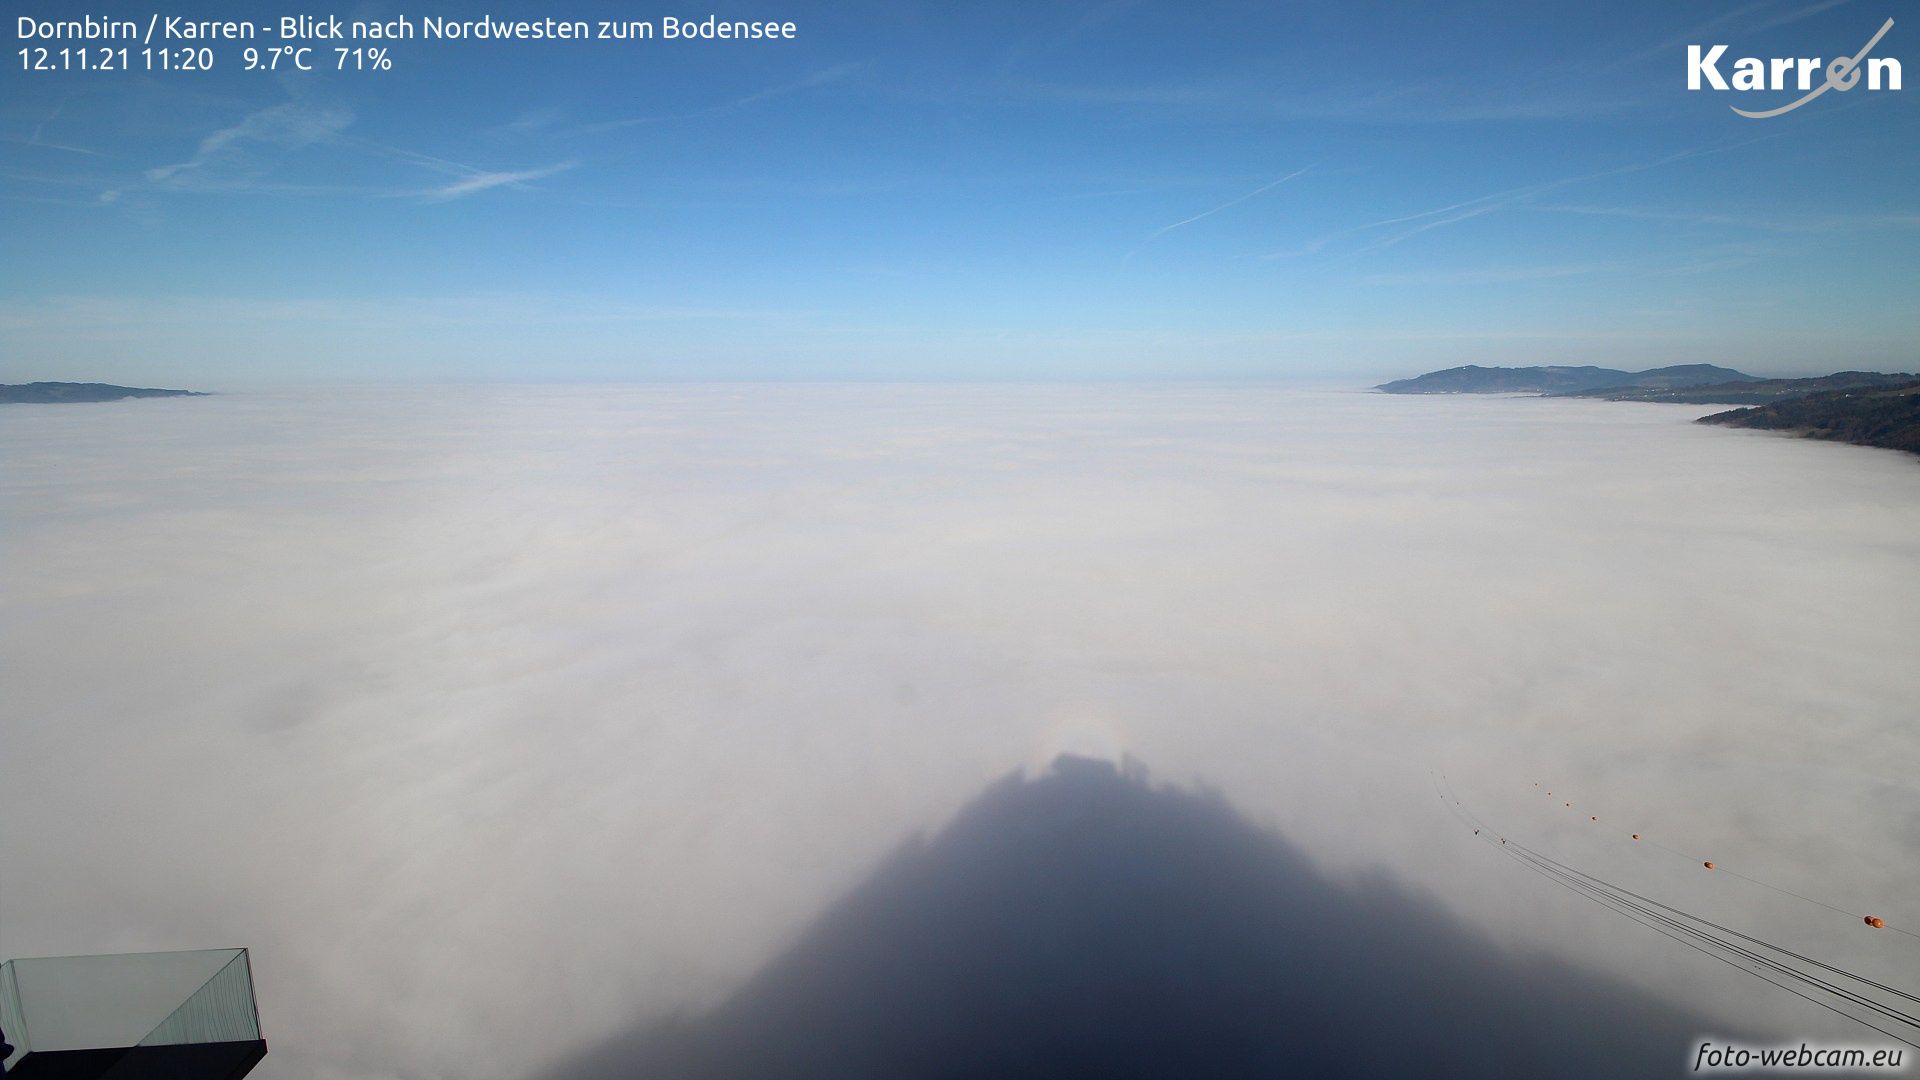 Thick fog soup in the Rhine valley too (foto-webcam.eu)